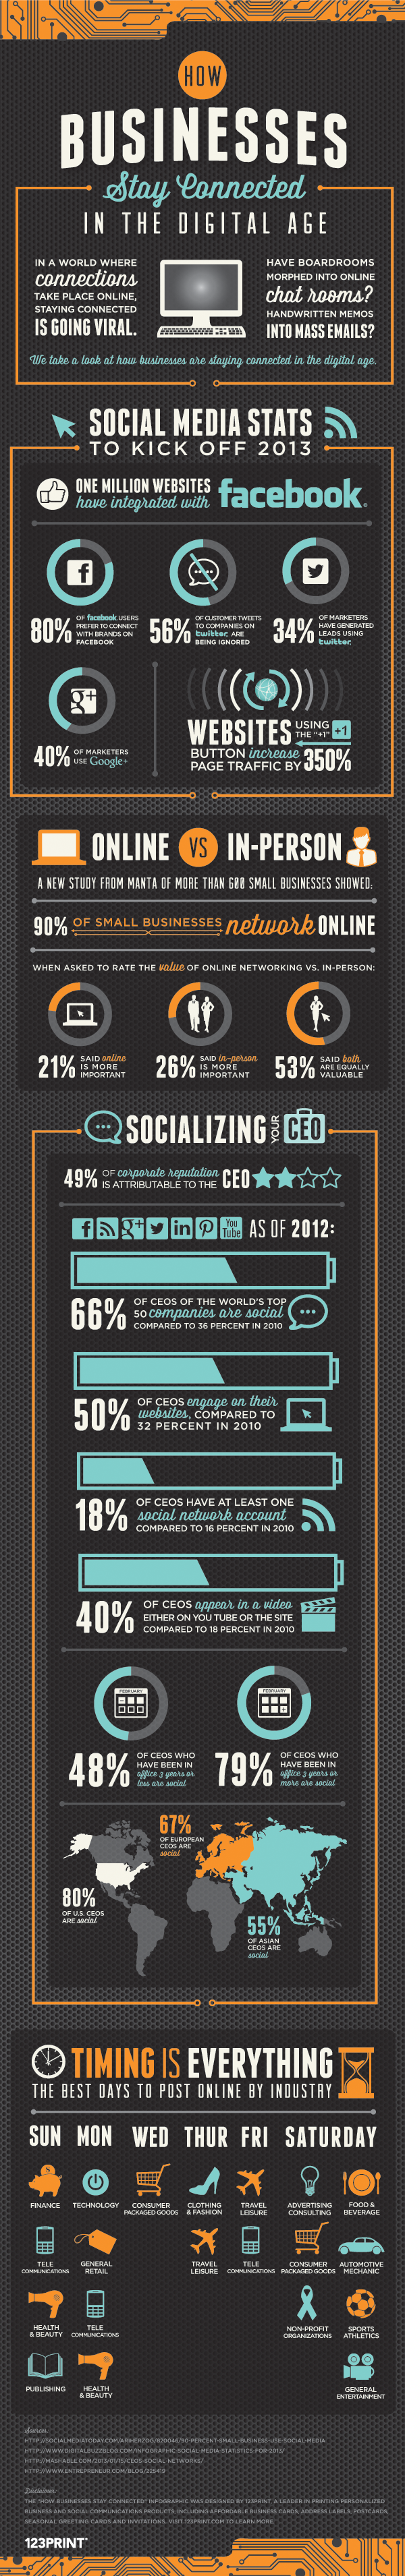 Infographic: Small Business Social Media Trends